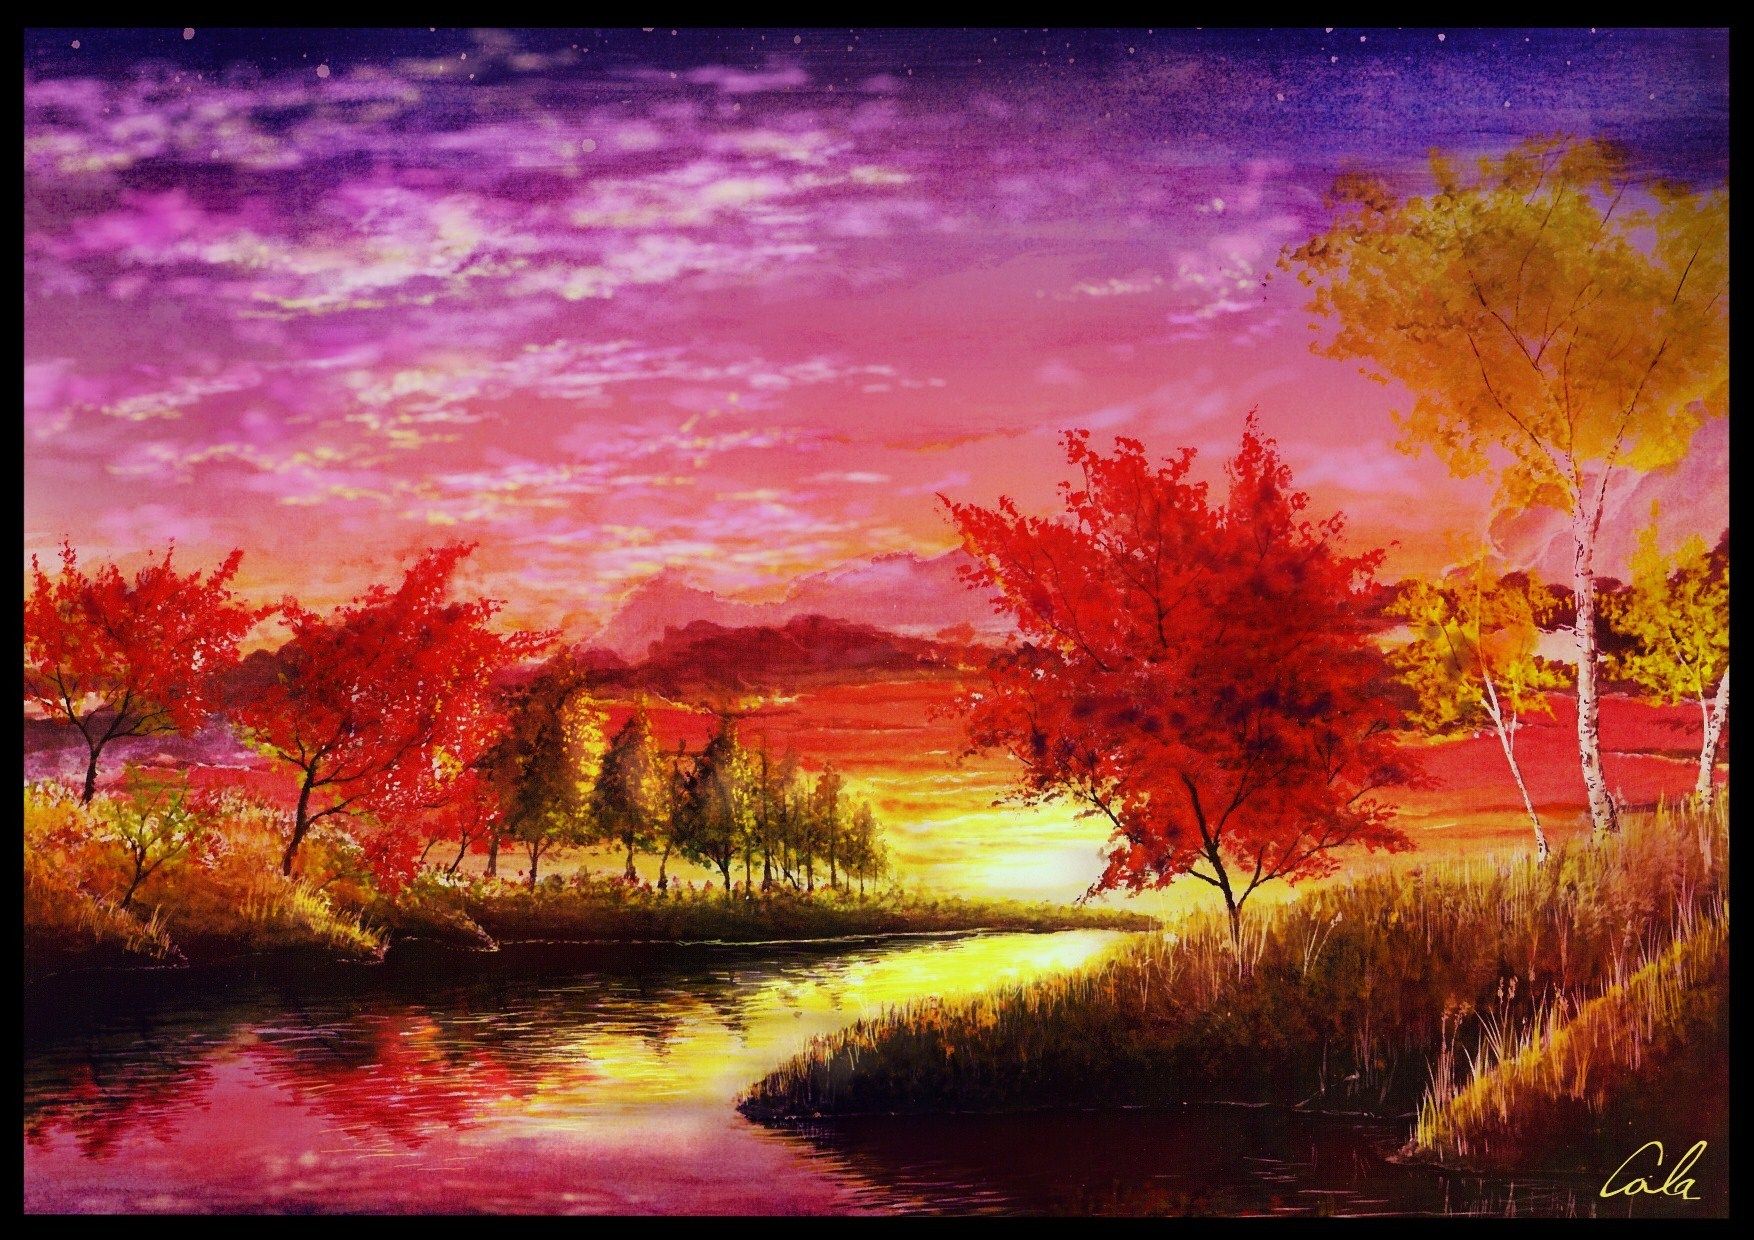 Autumn Anime Scenery Wallpapers - Wallpaper Cave